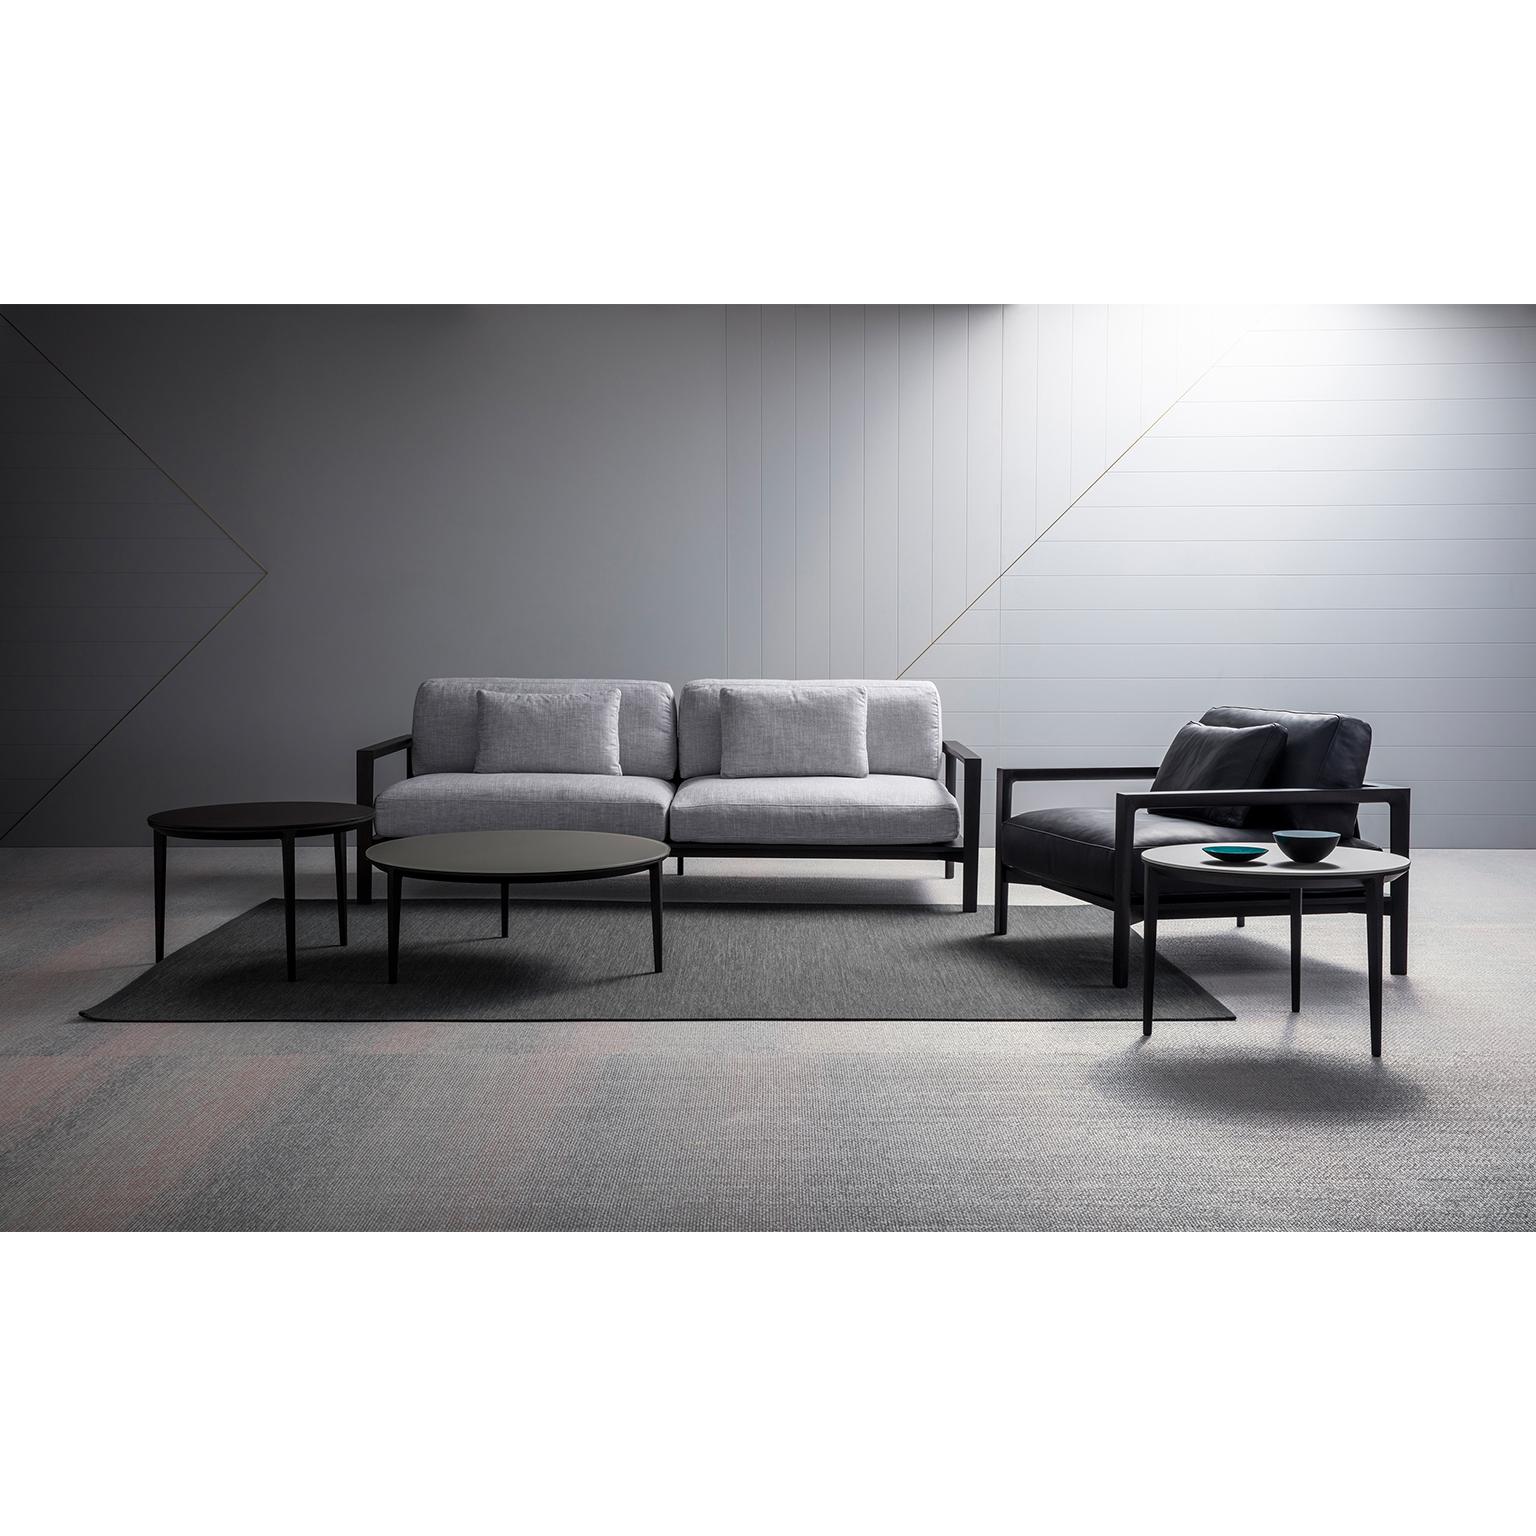 Ling is a beautifully detailed and elevated seating range with chameleon-like qualities choose a natural ash frame and Ling evokes a sense of Danish design and sculptural simplicity. In the carbon stain, the pieces has greater intensity and a more